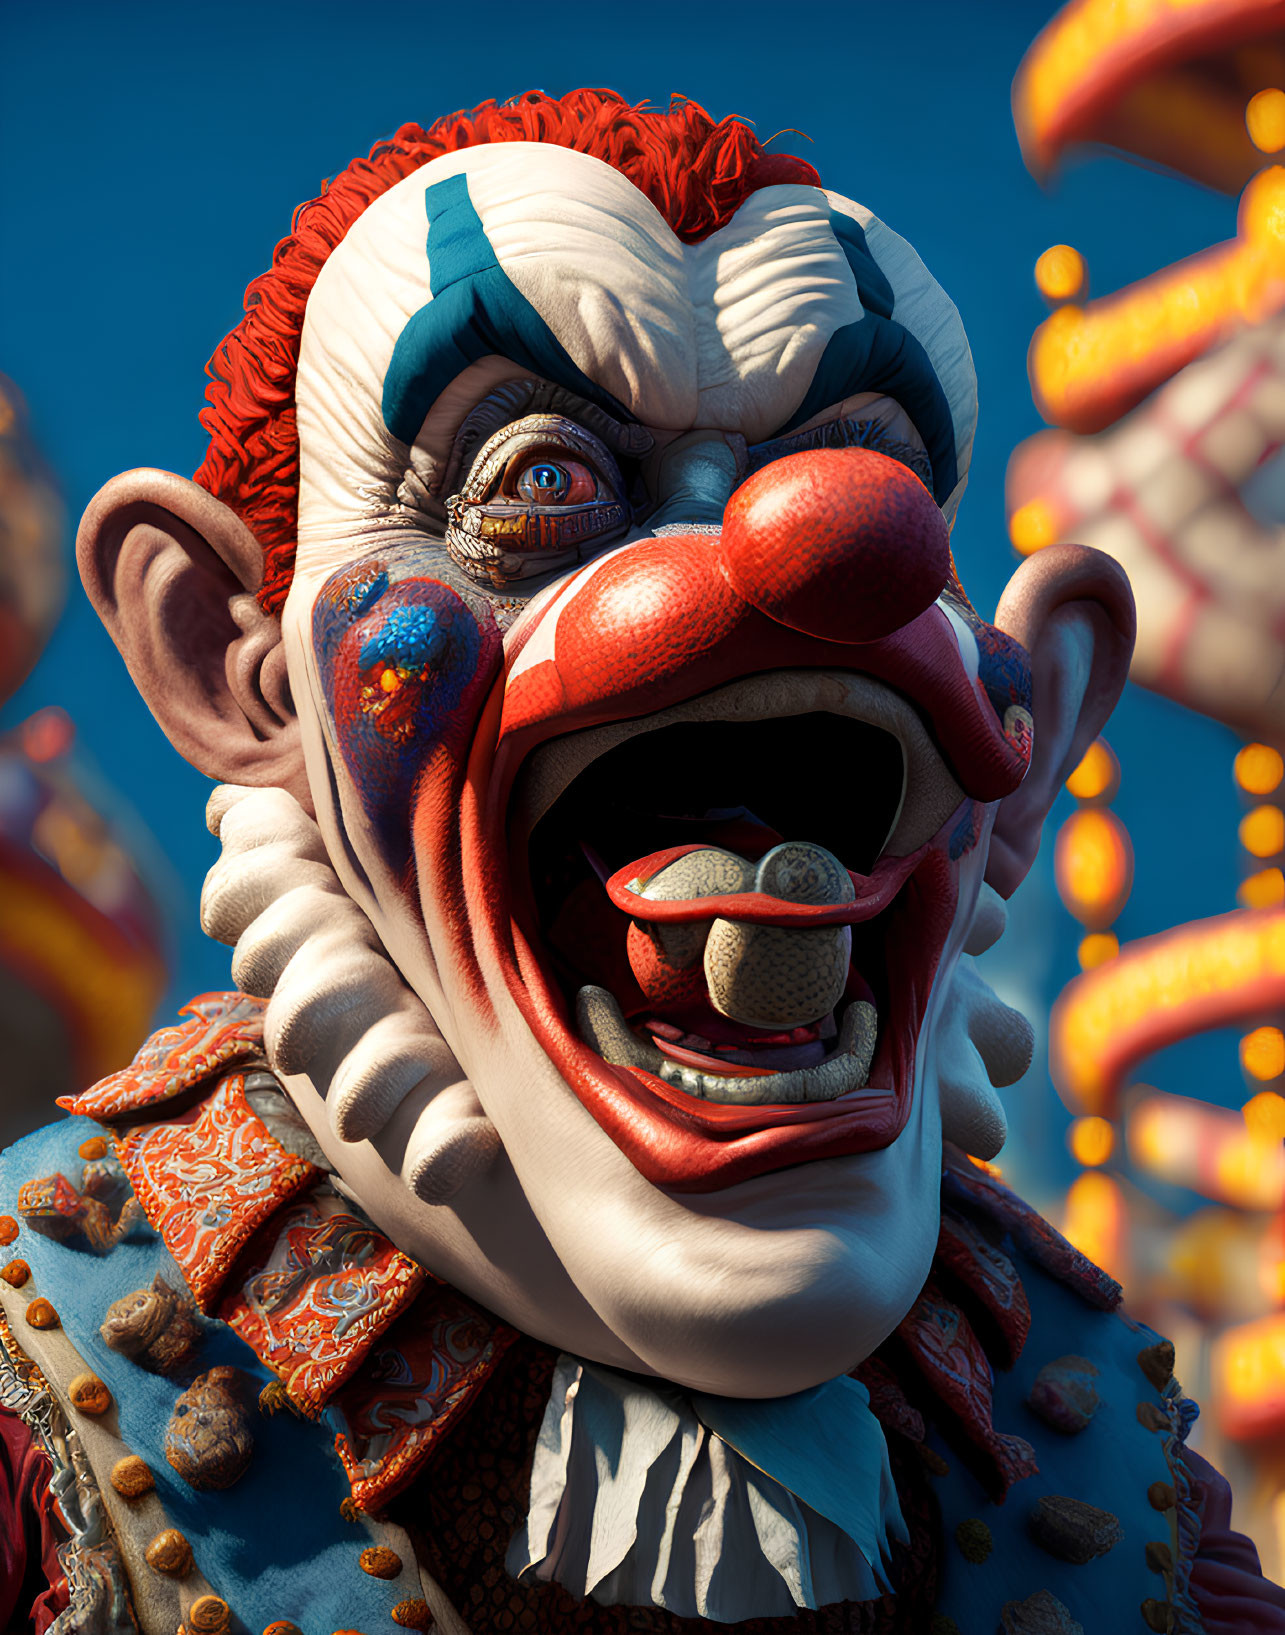 Detailed Close-Up of Surprised Clown in Colorful Costume